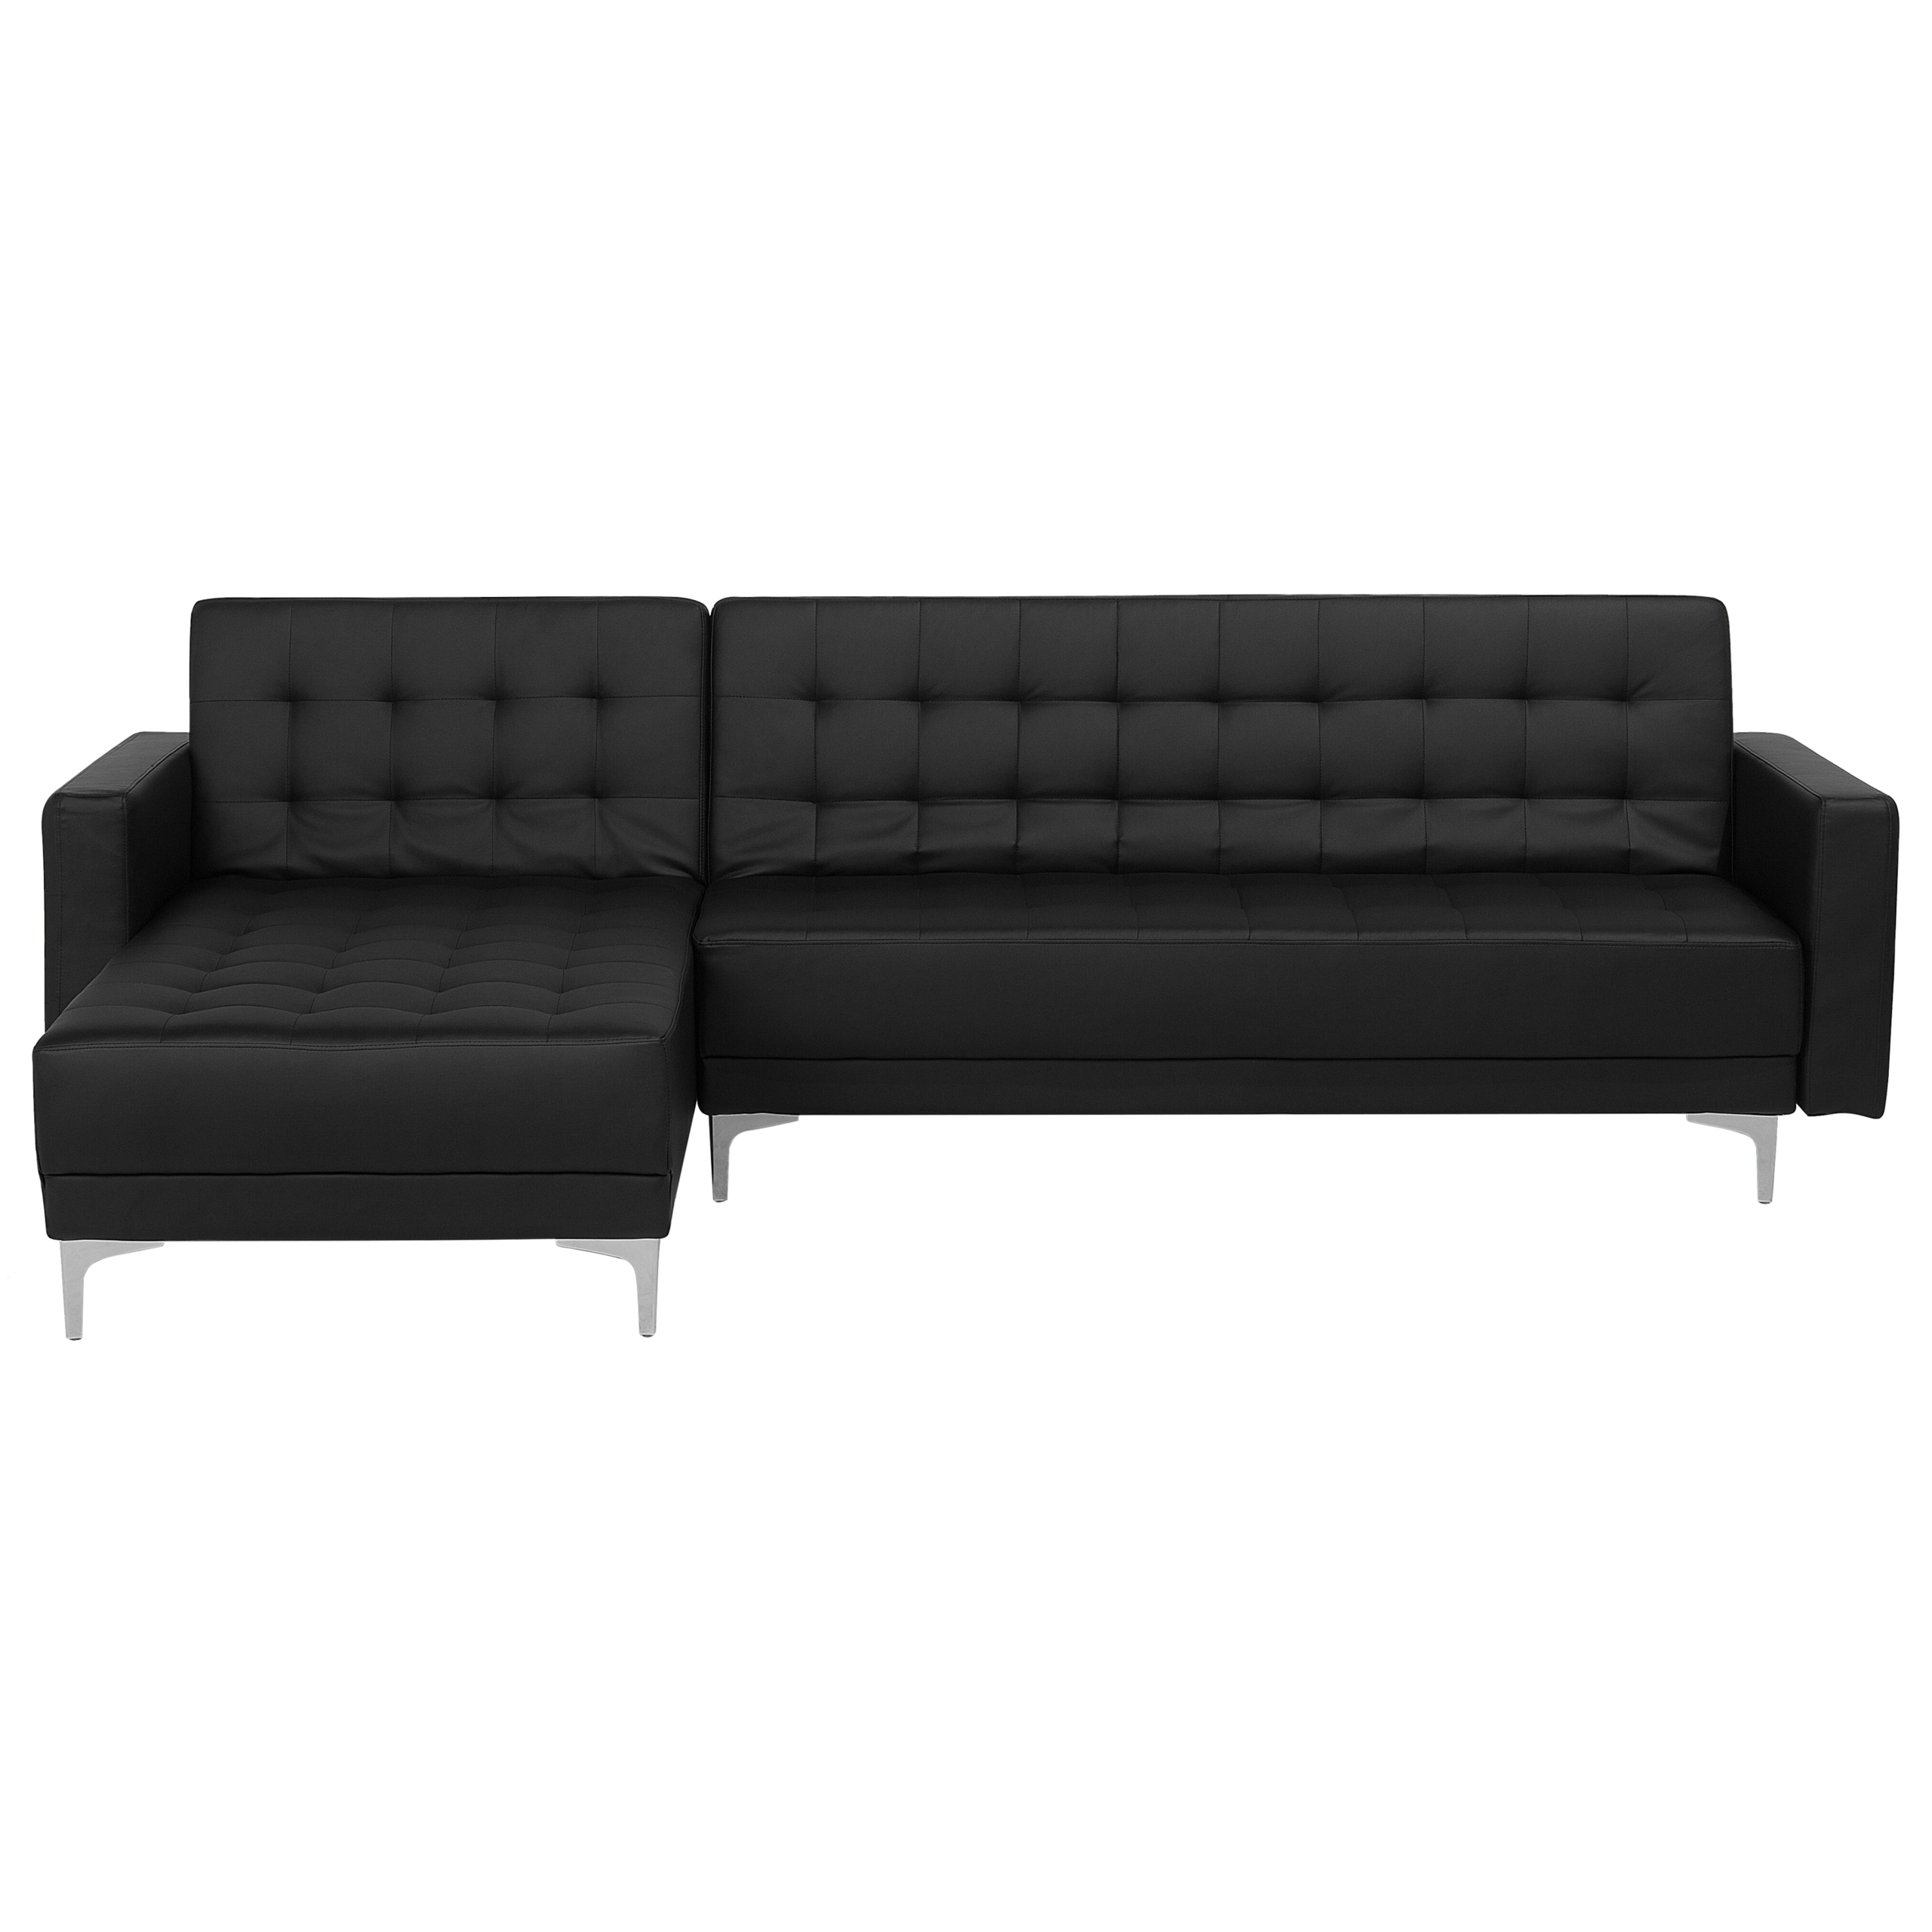 Beliani Corner Sofa Bed Black Faux Leather Tufted Modern L-Shaped Modular 4 Seater Right Hand Chaise Longue